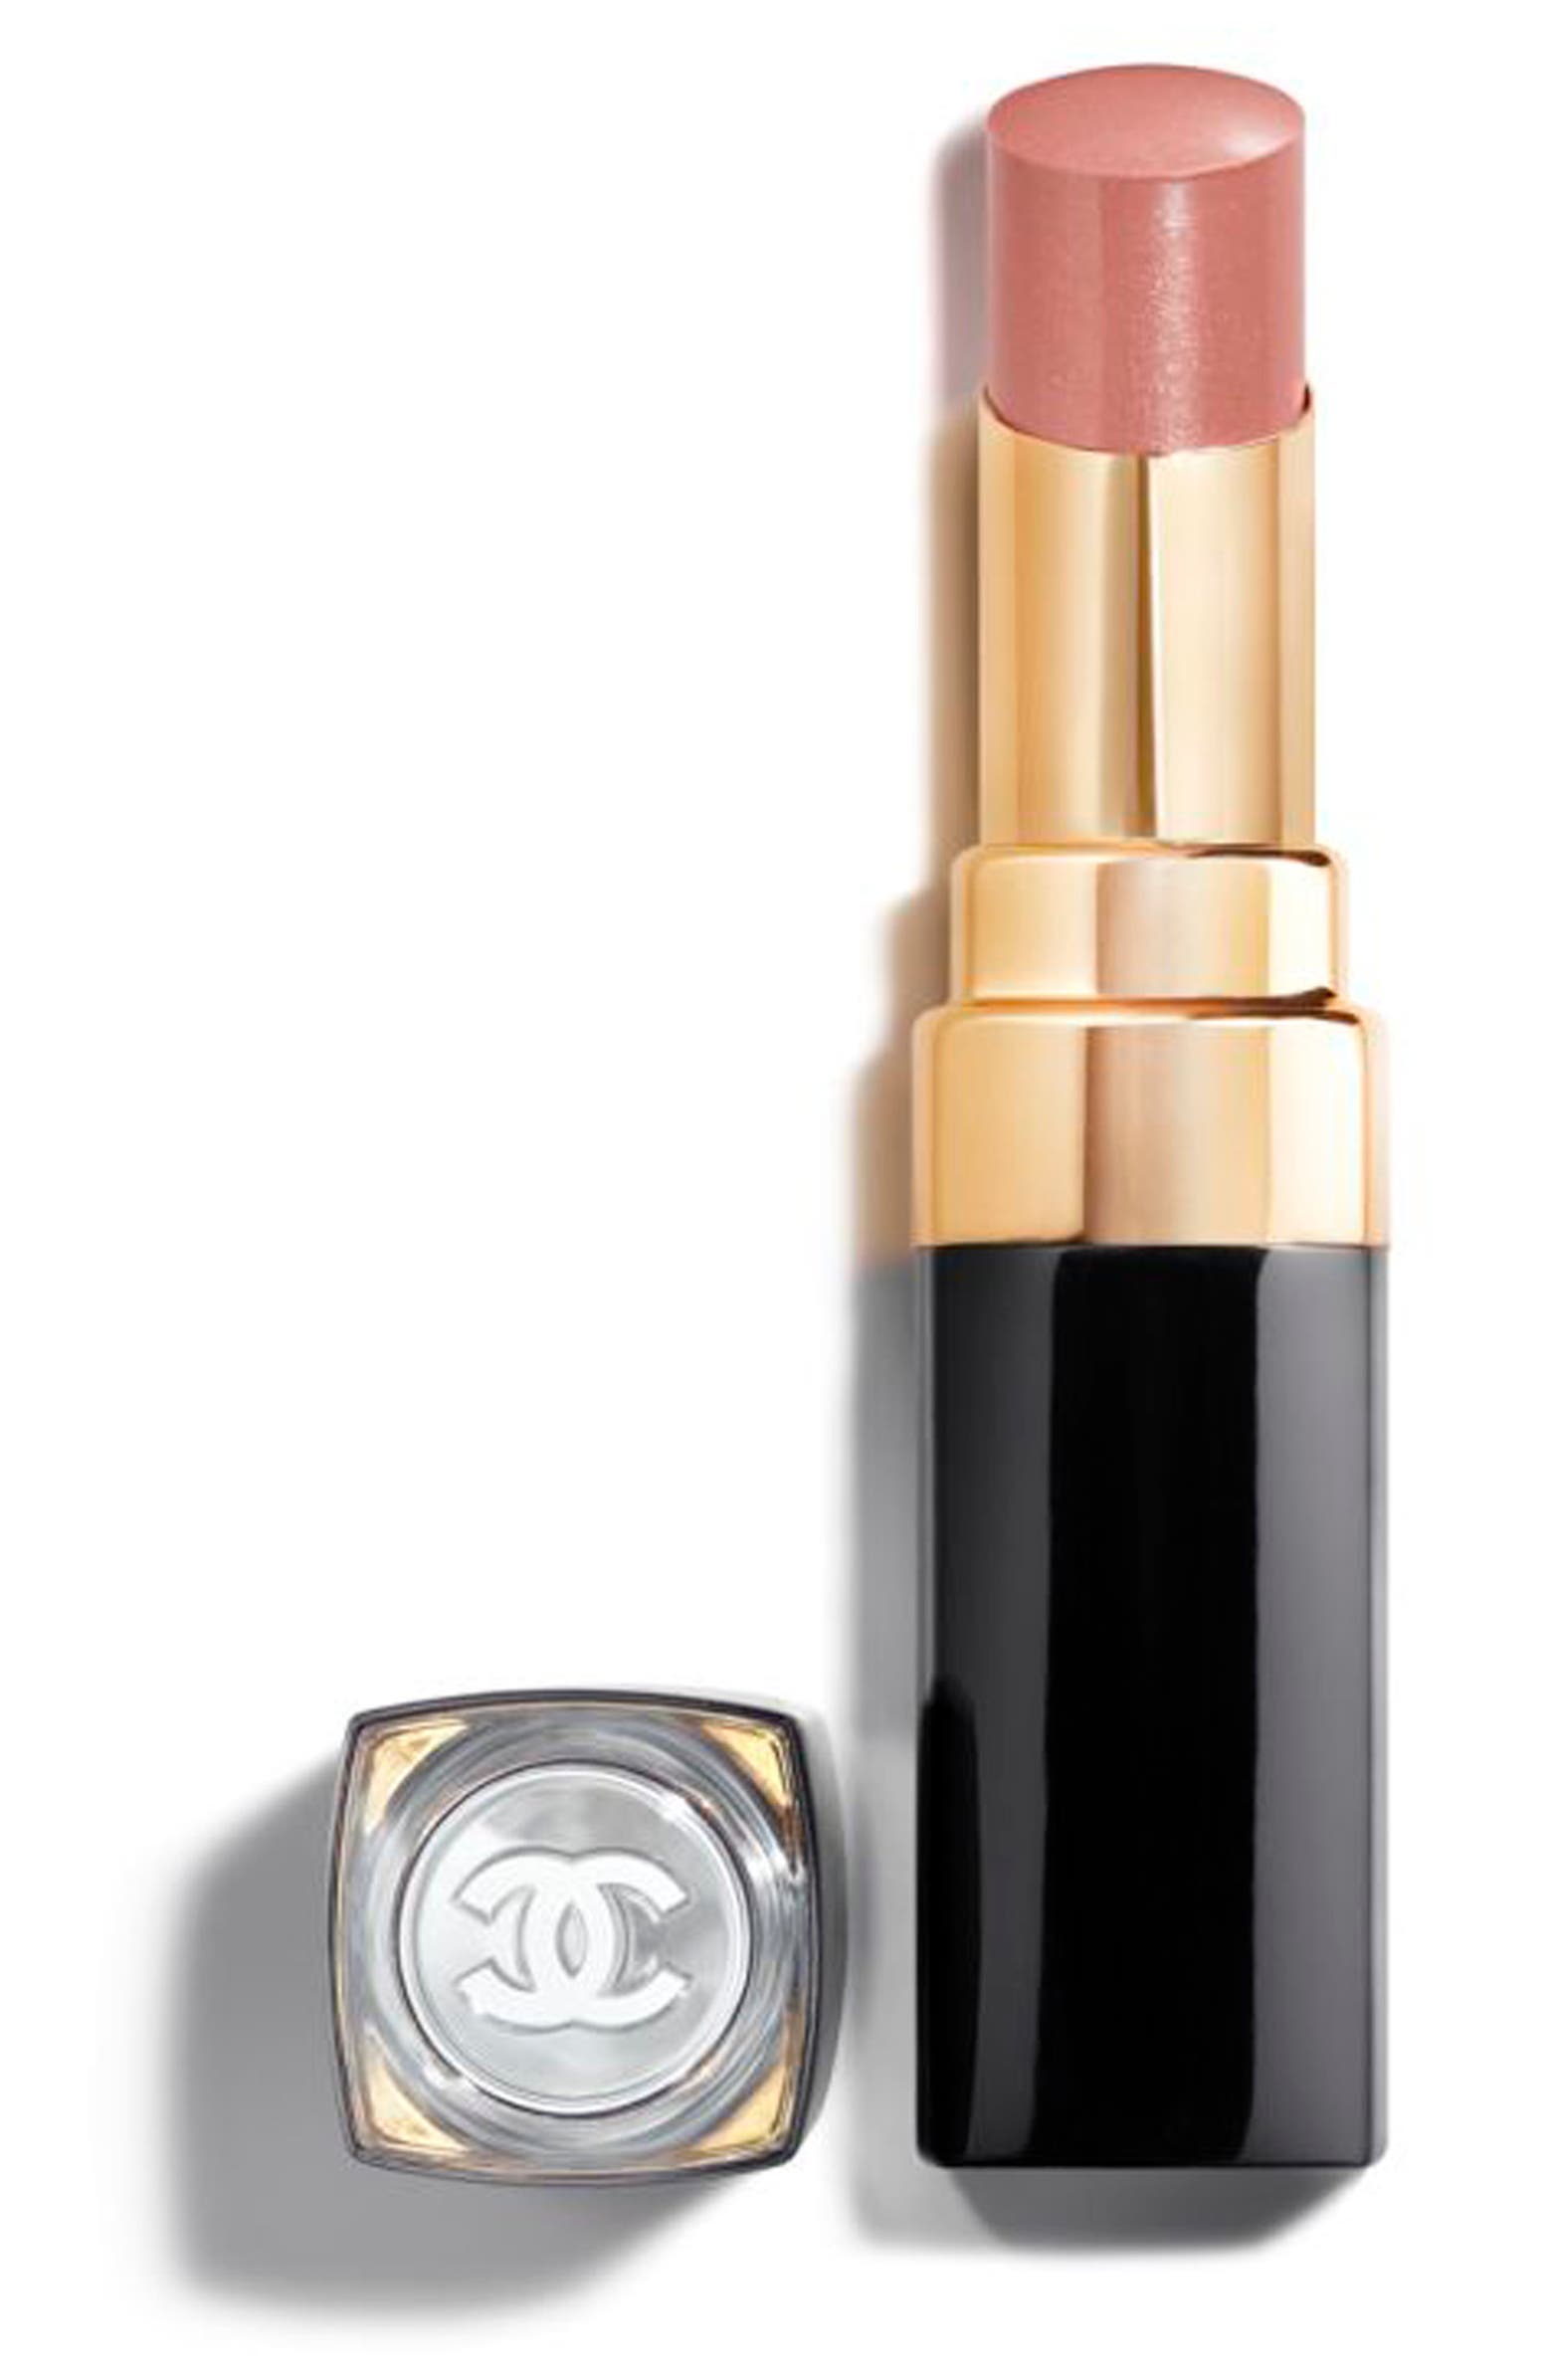 Chanel Rouge Coco lipstick in Boy